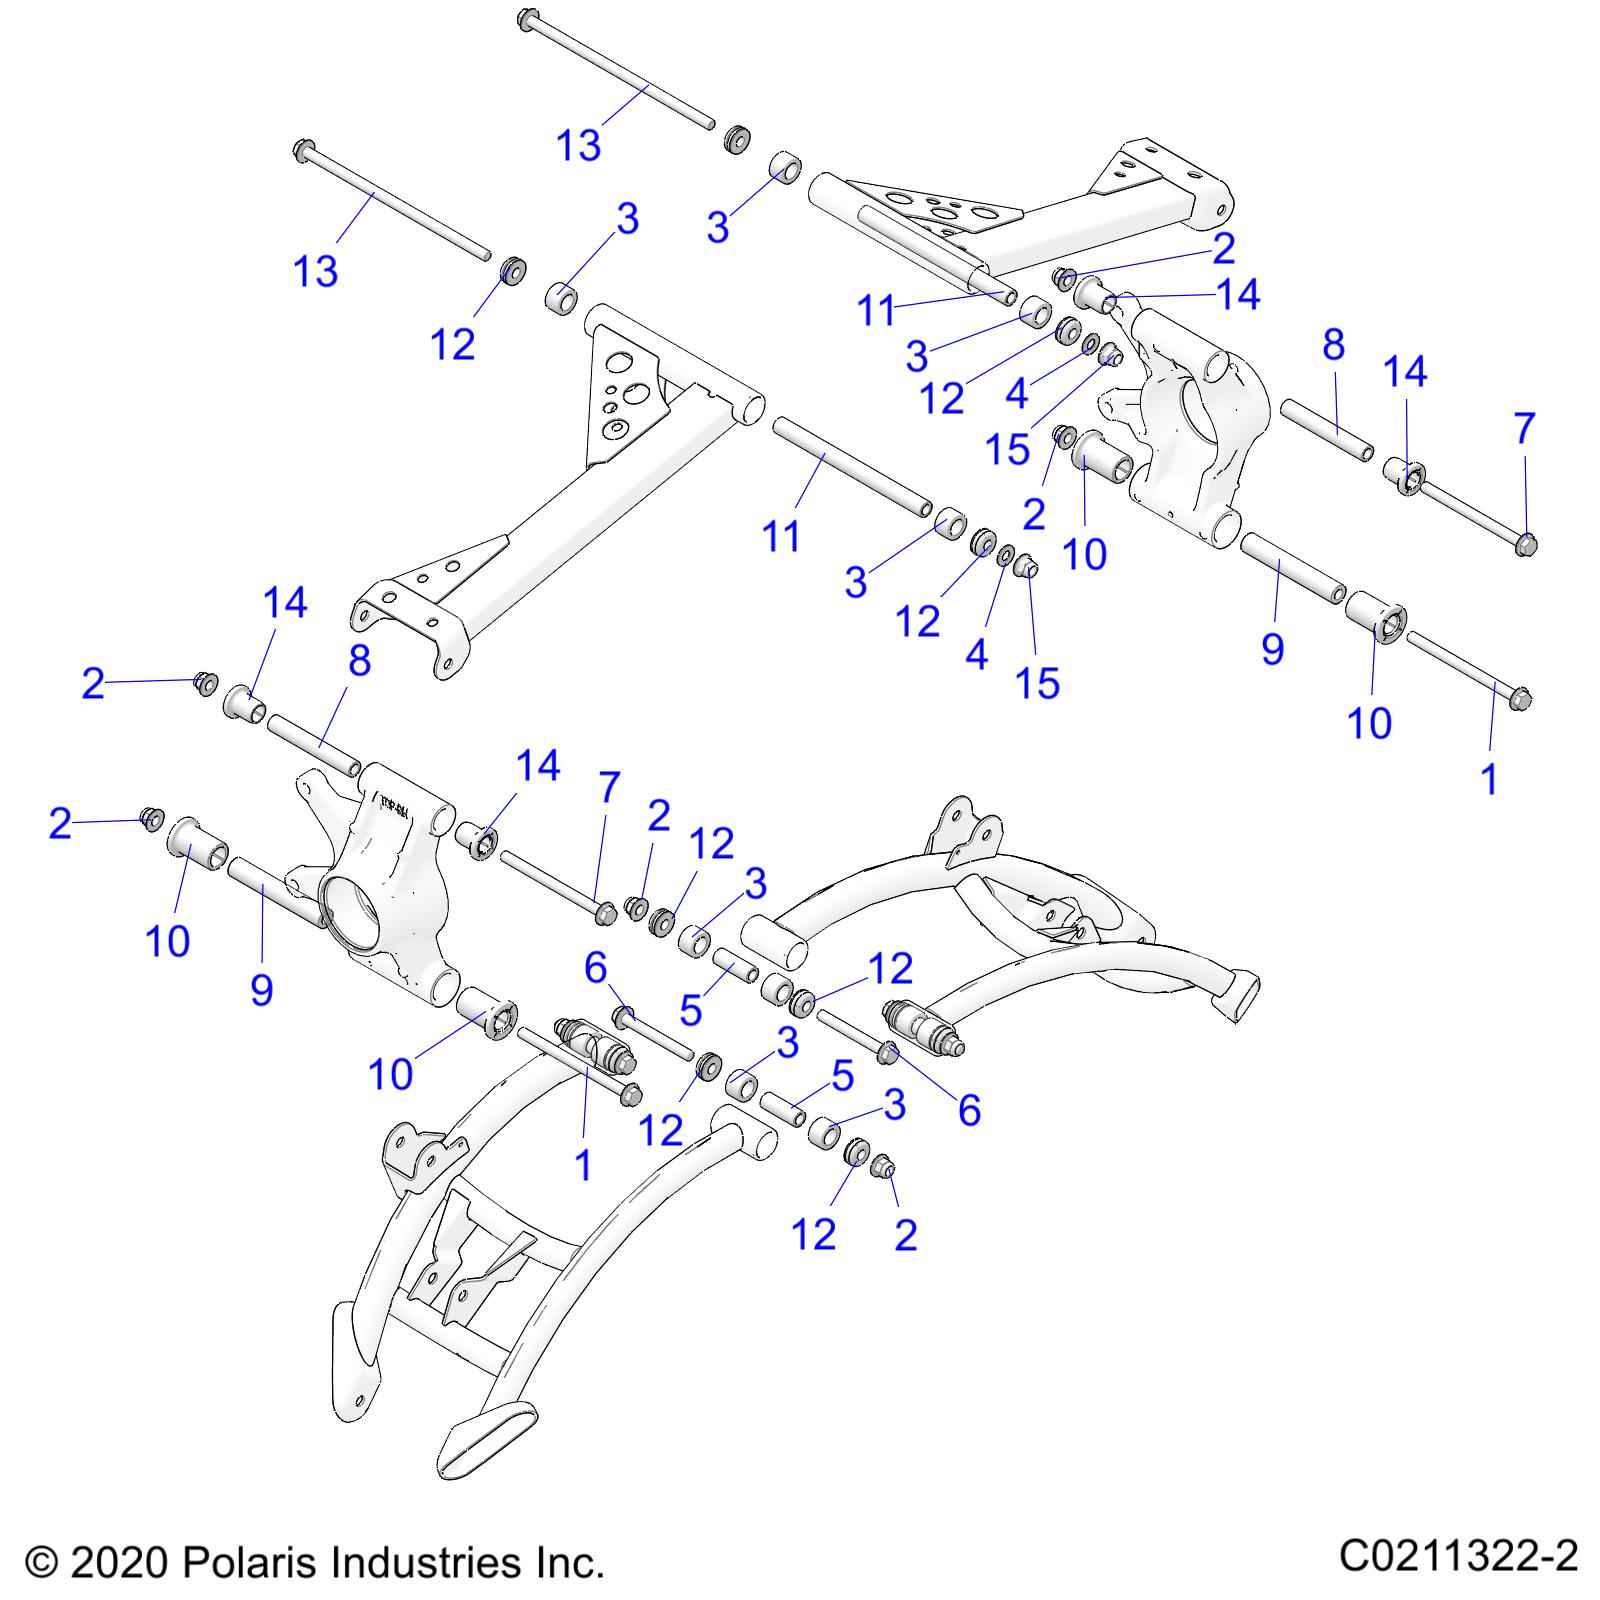 Part Number : 5136473 LOWER CONTROL ARM A ARM SHAFT